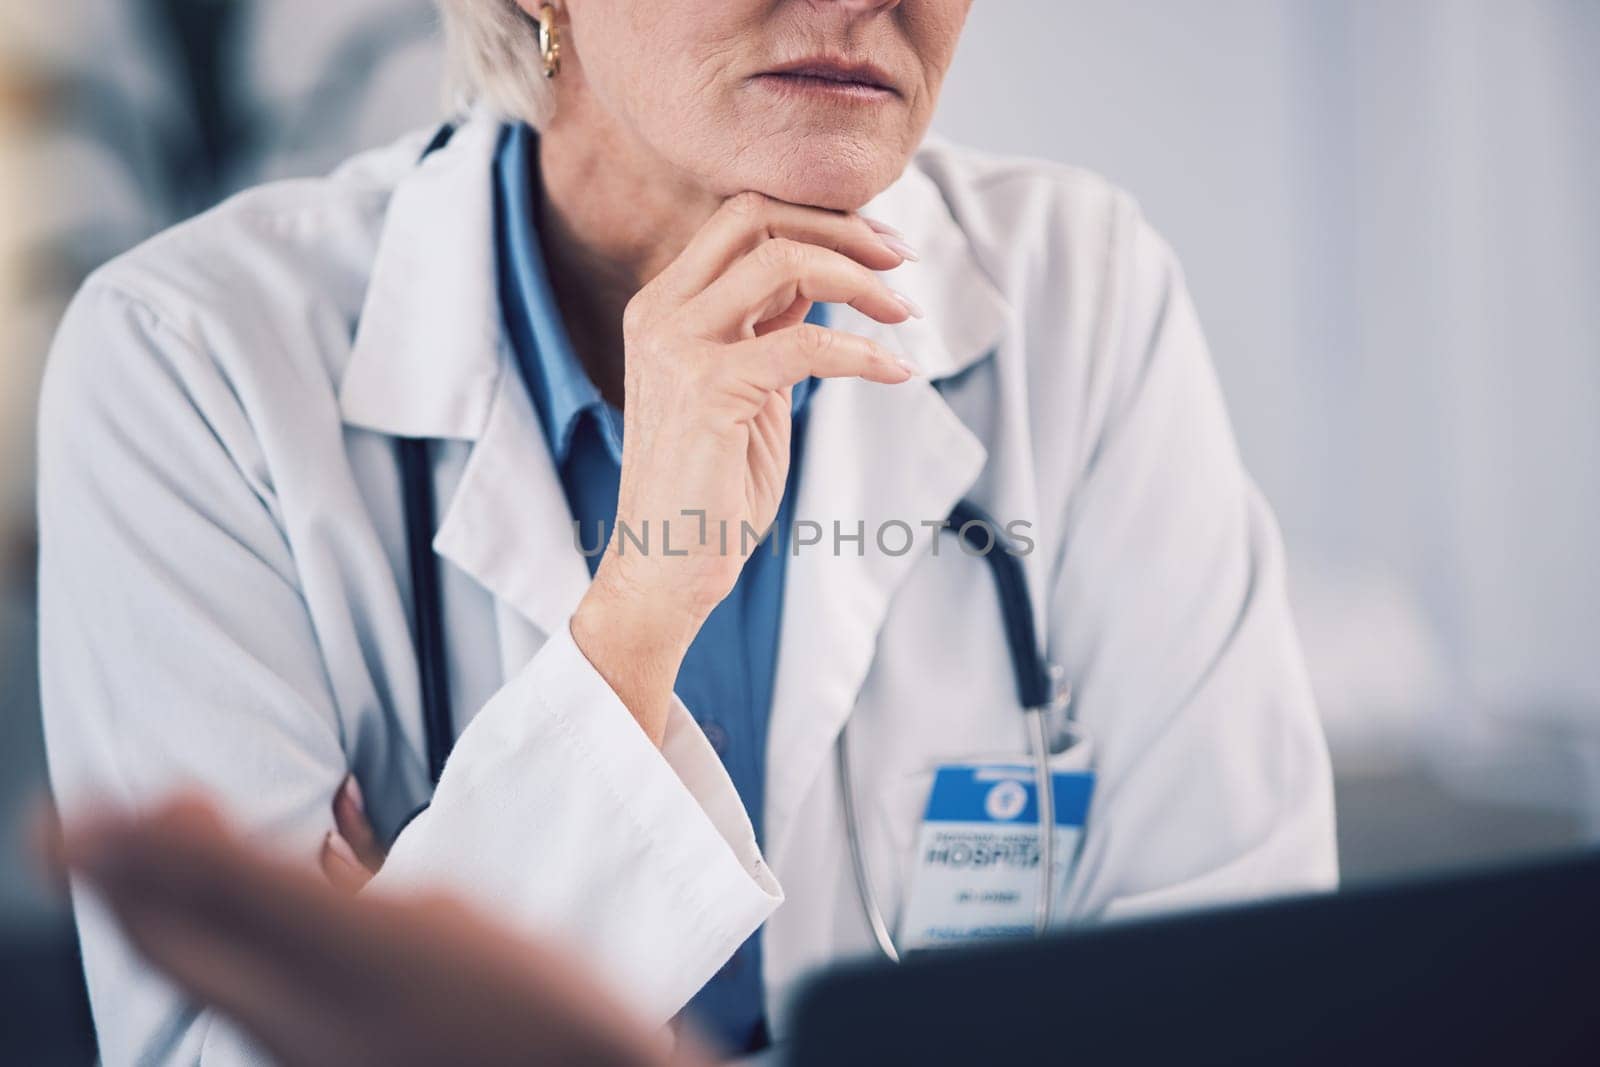 Woman, doctor and listening to patient in clinic consultation for healthcare advice. Closeup of medical professional consulting with client for support, wellness service and communication of results.